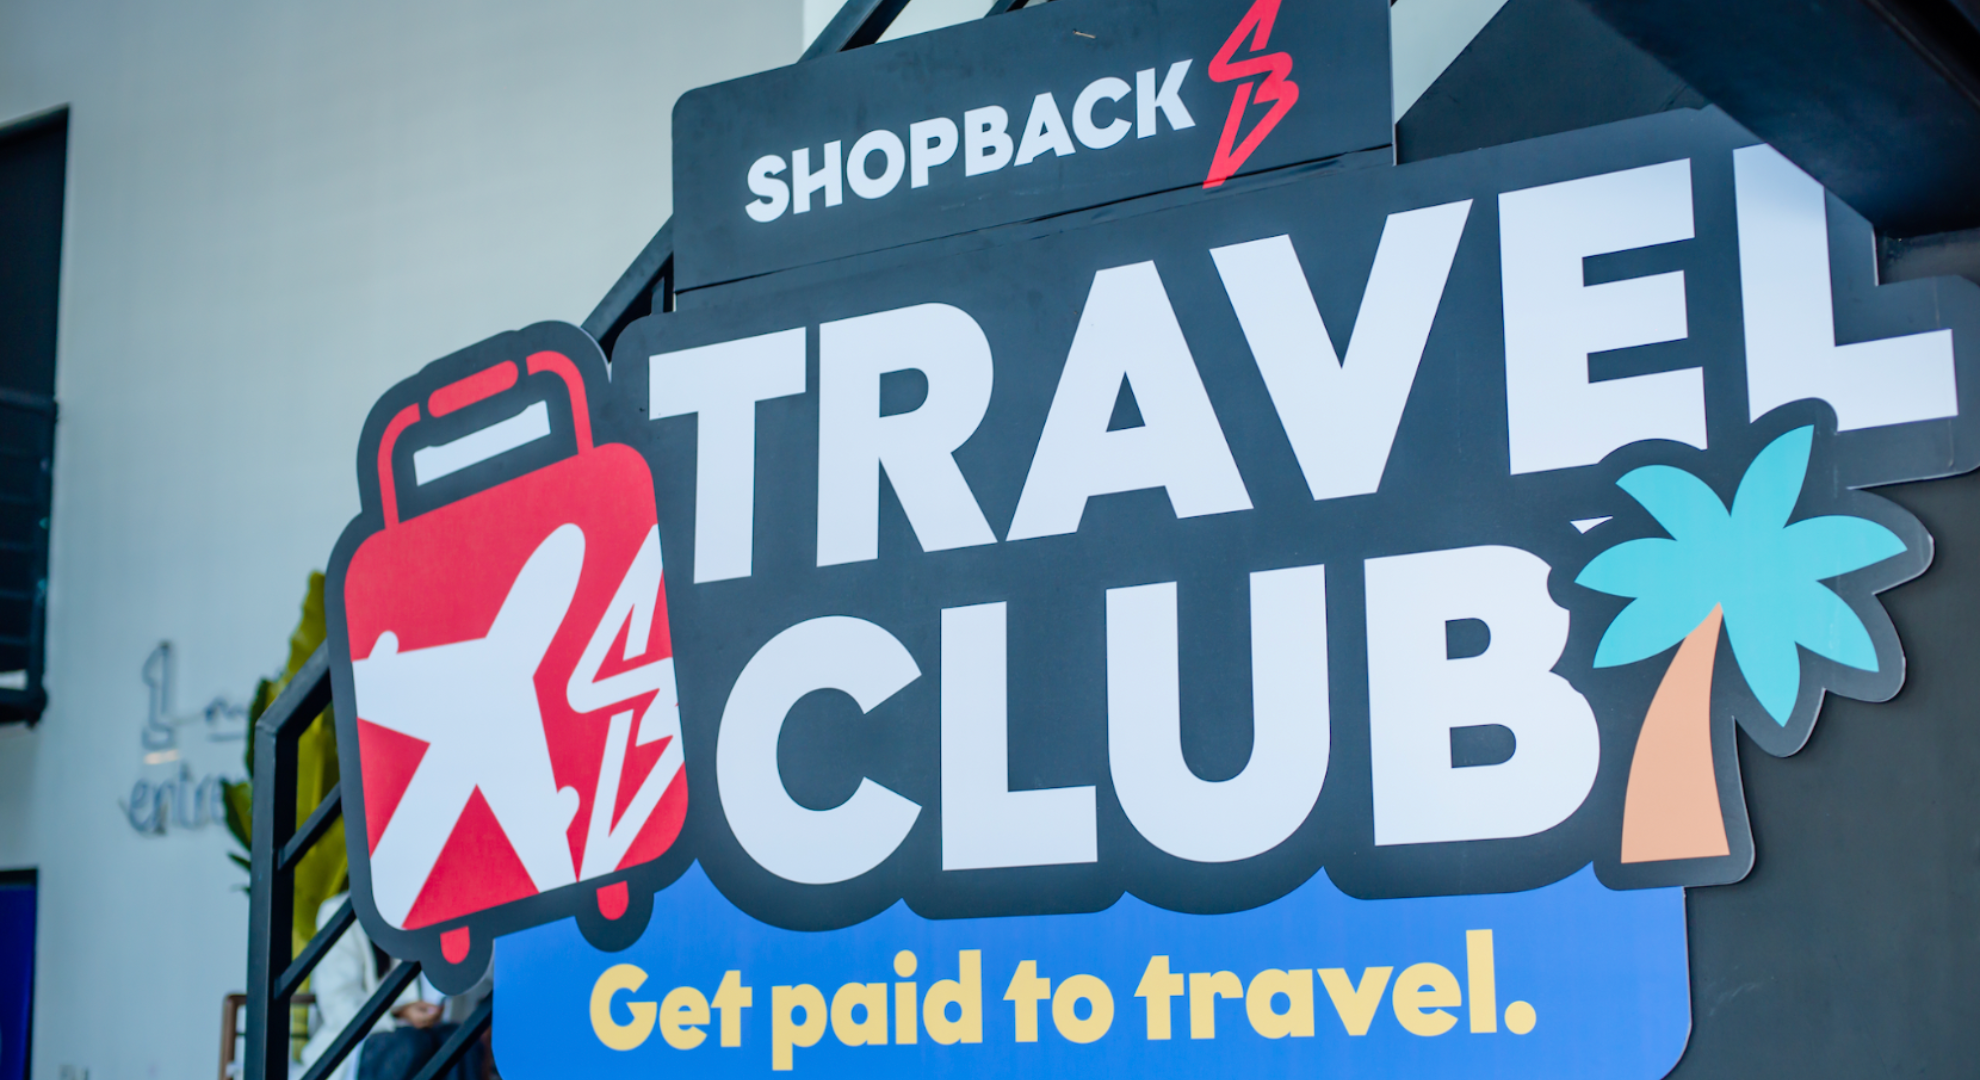 Get paid to travel with ShopBack Travel Club